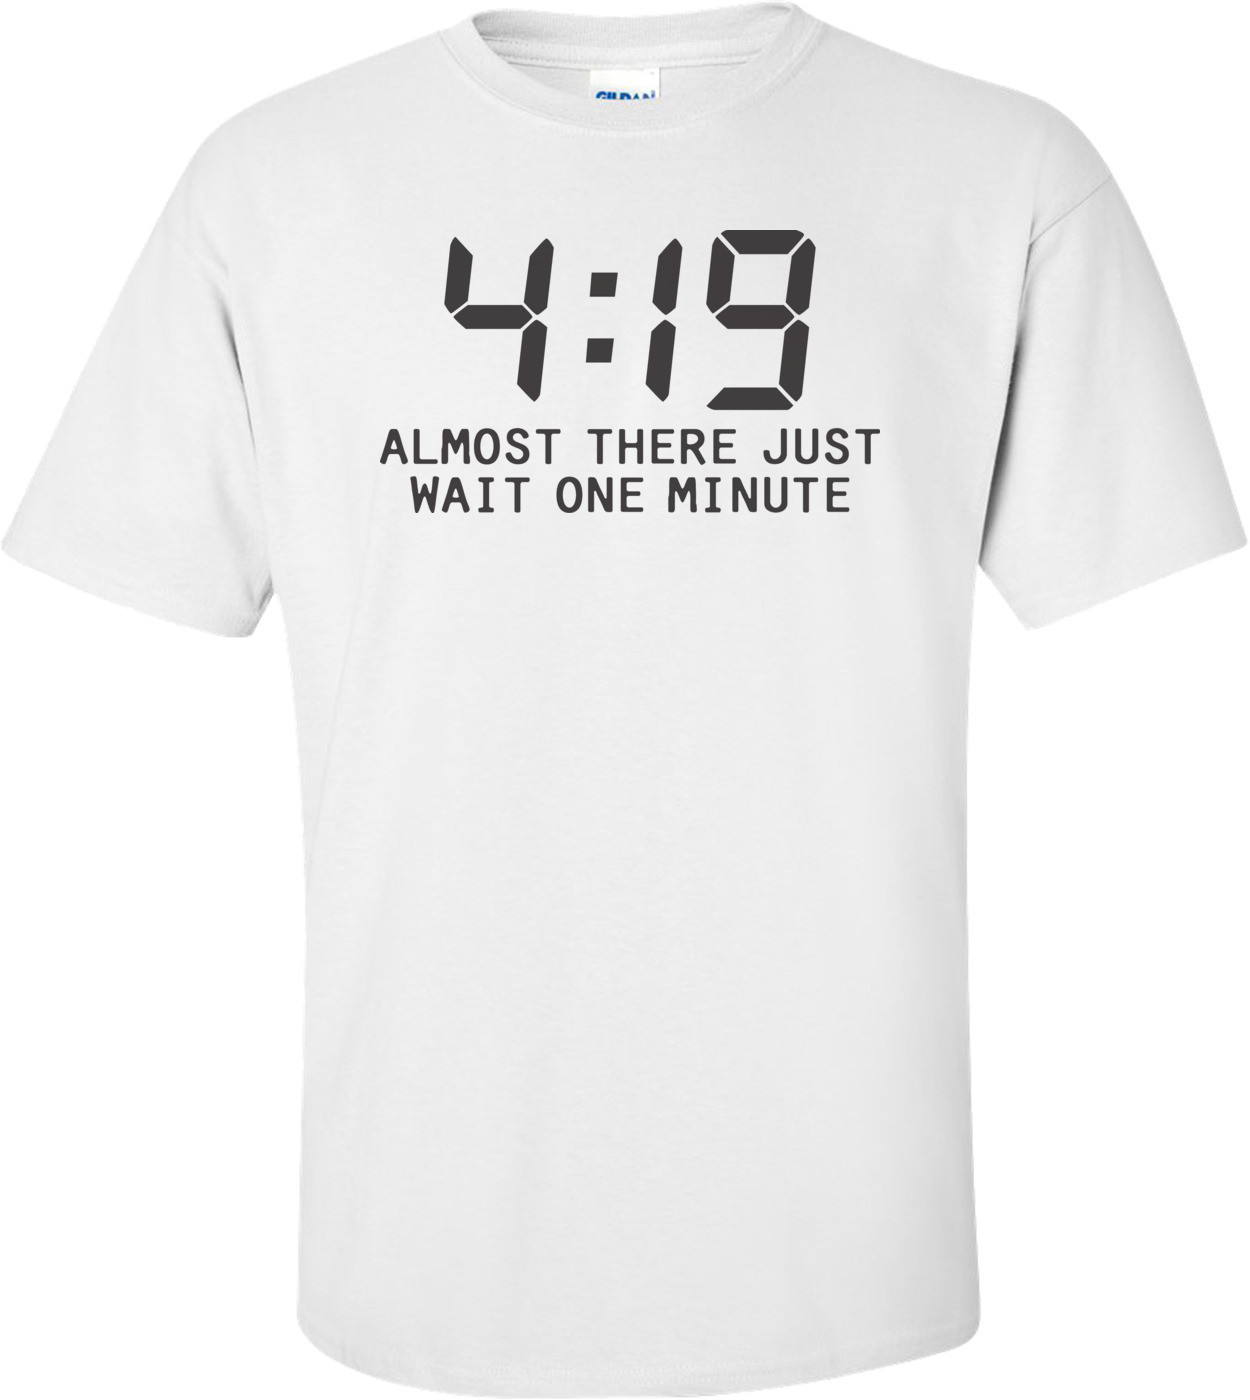 4:19 Almost There Just Wait One Minute T-shirt